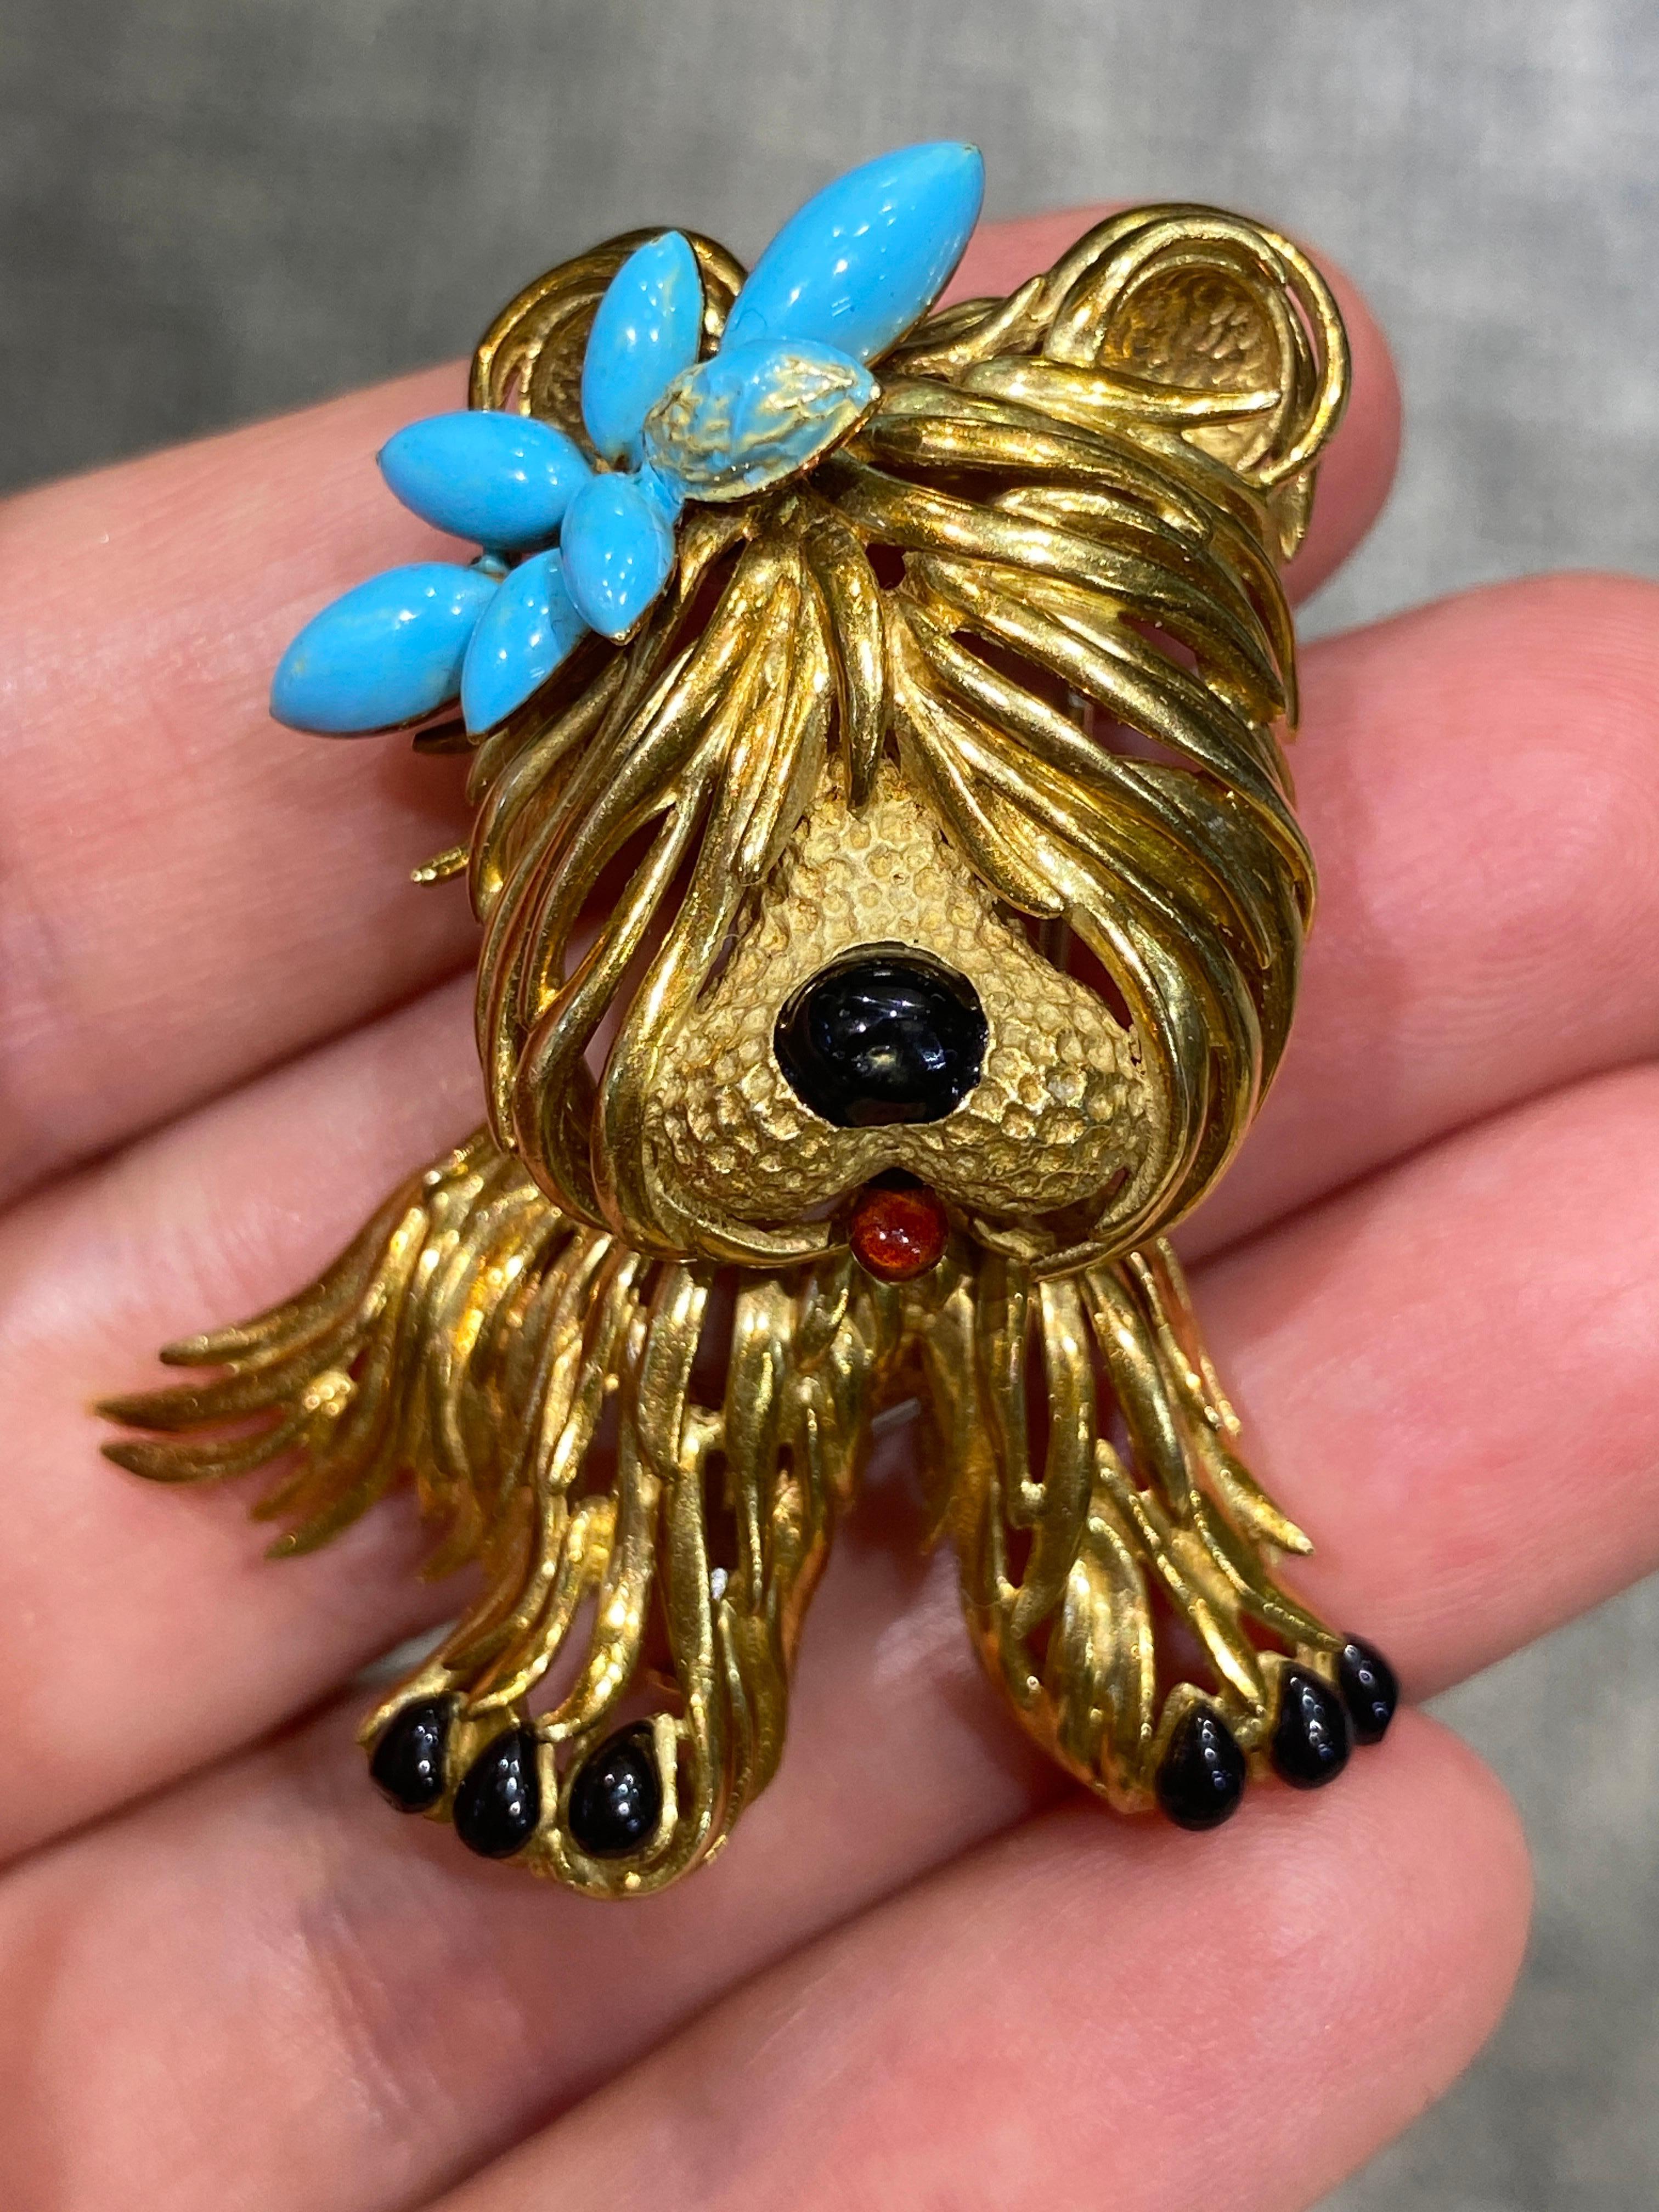 This charming Fred Paris 18 carat gold puppy brooch is a delightful piece. The blue bow in its hair and its red mouth are made of enamel while its nose and feet are made of onyx. The workmanship is quite remarkable.